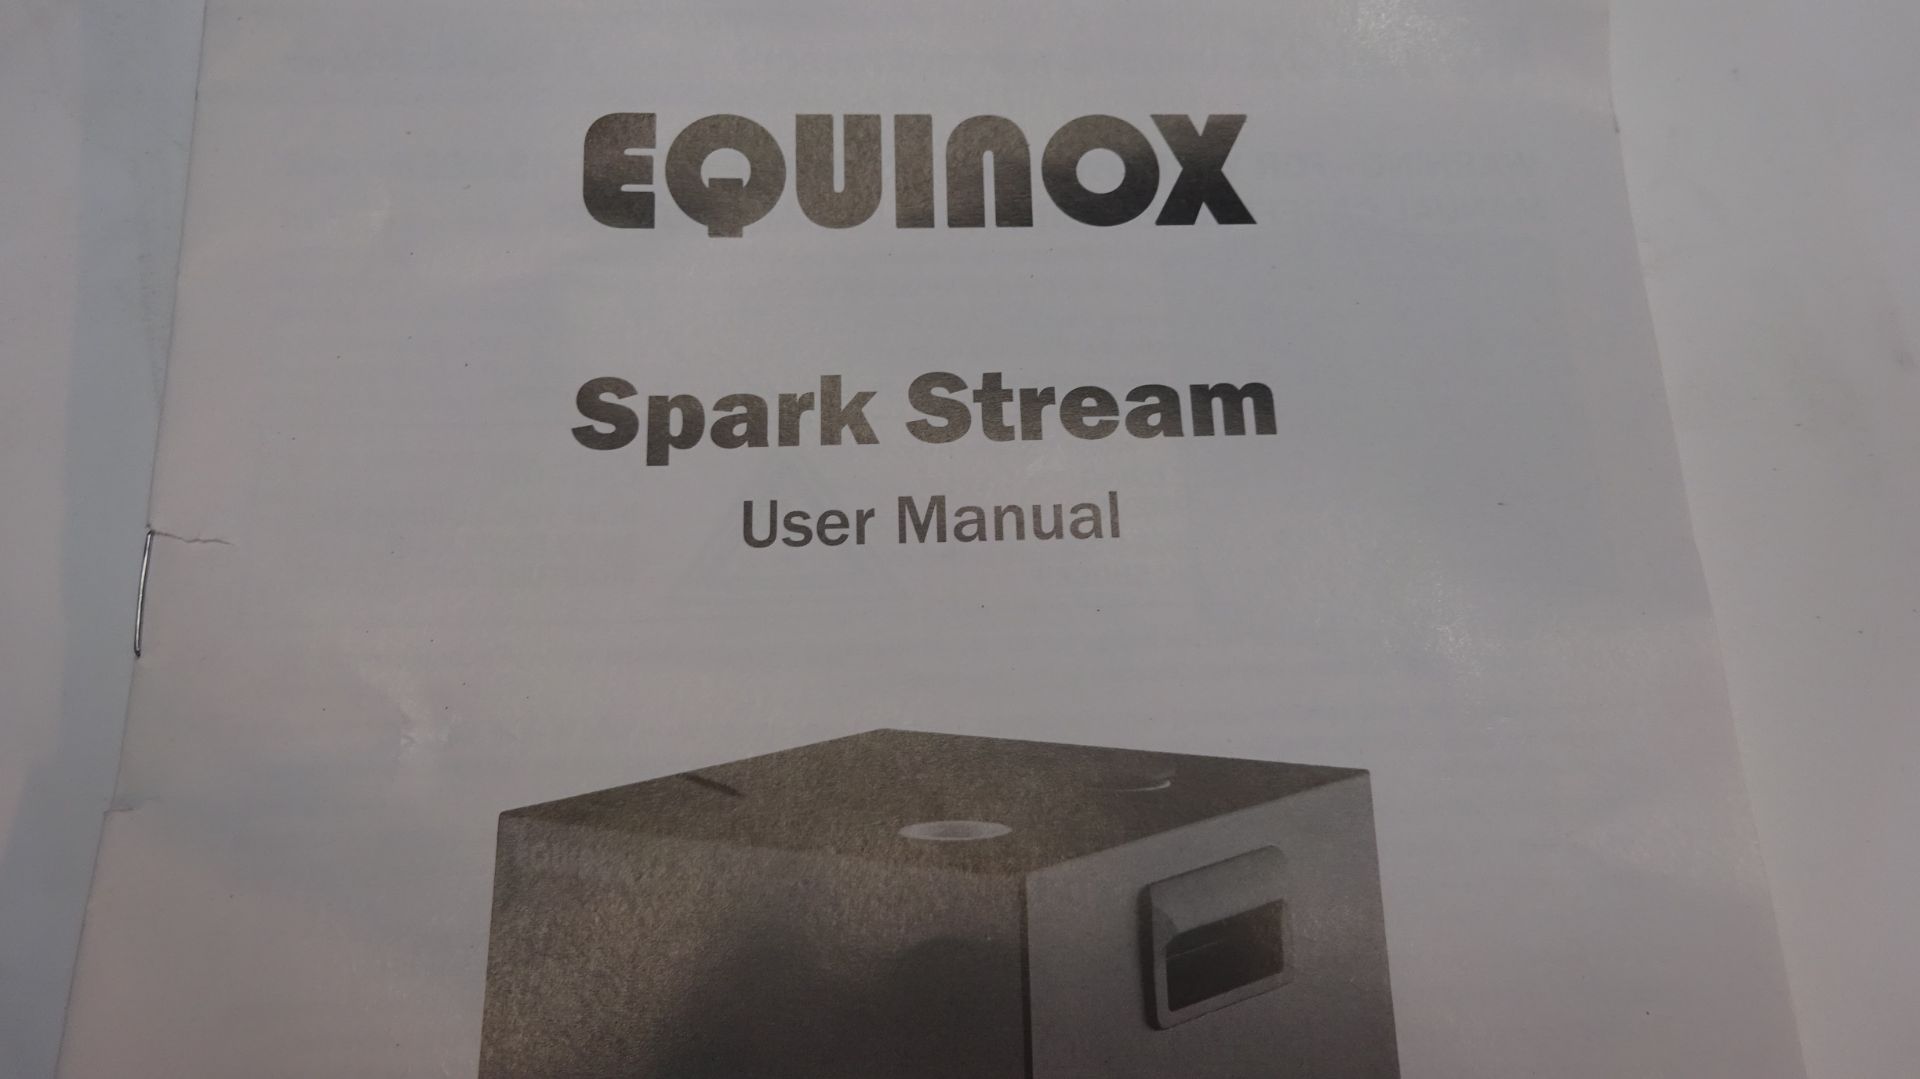 6 x Equinox Spark Stream ProLight c/w 6 x Remote Controls, Tub of Spark Stream Power, Cleaning - Image 14 of 20